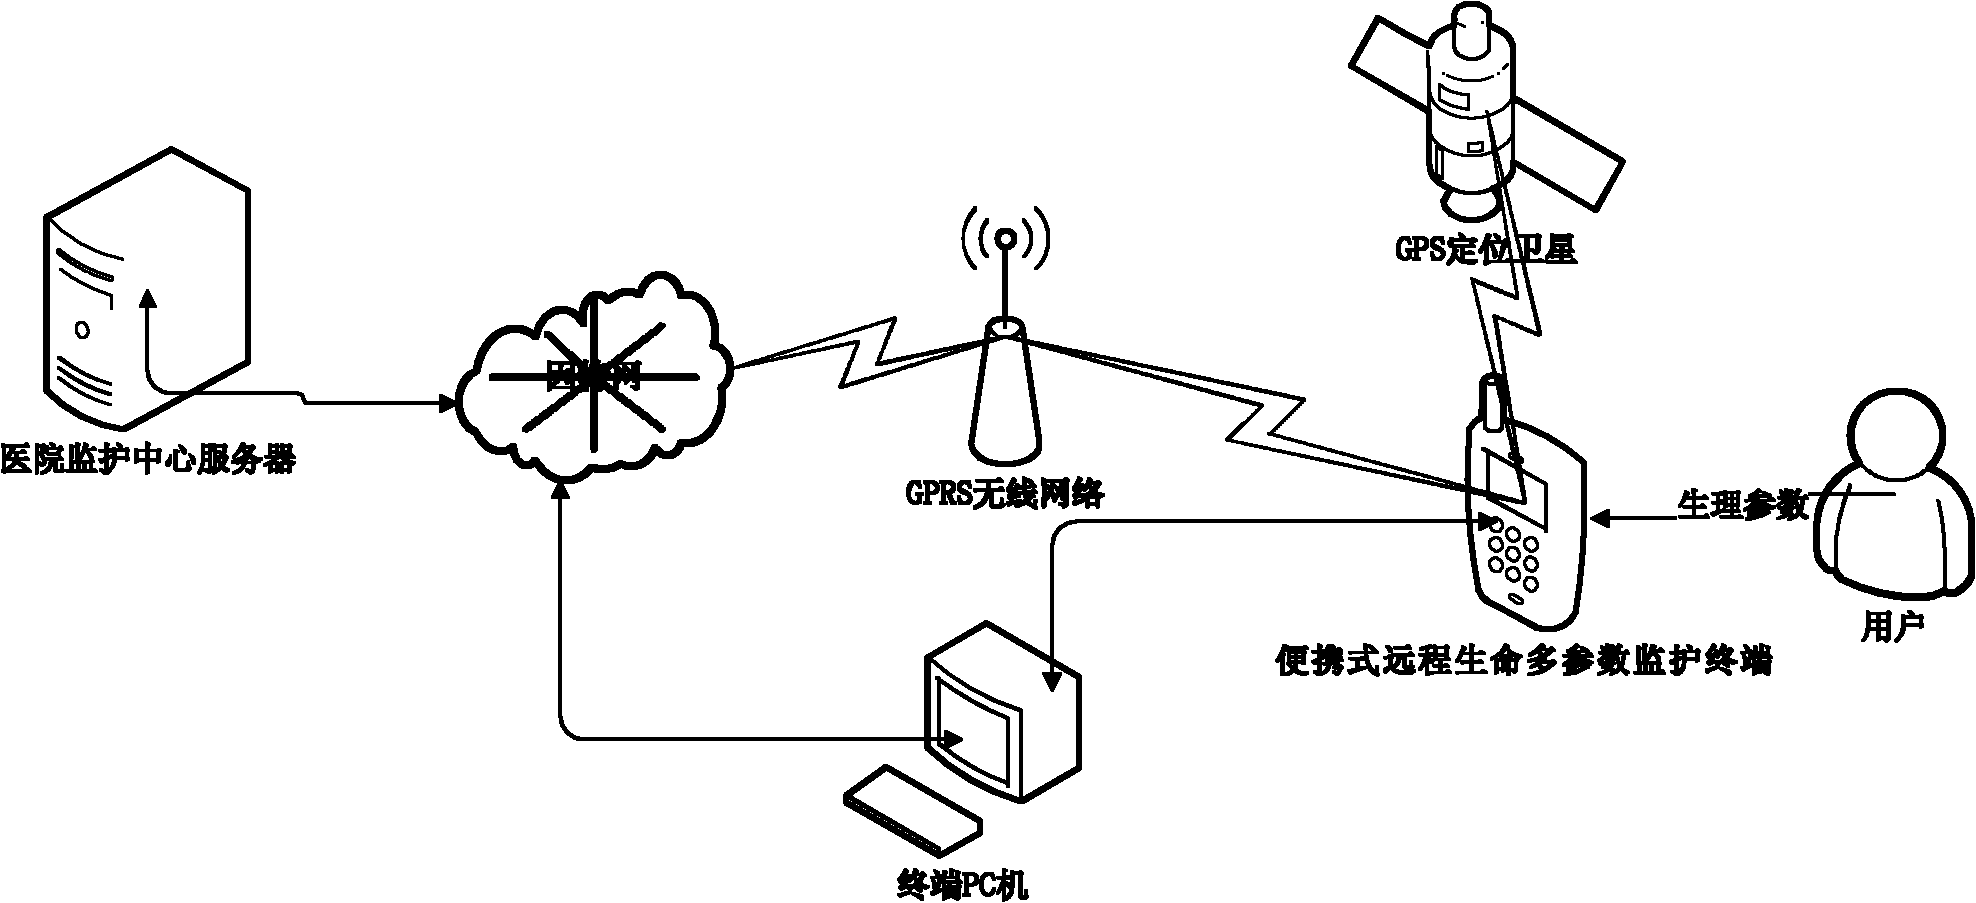 Portable remote life multi-parameter monitoring terminal and constructed remote monitoring system